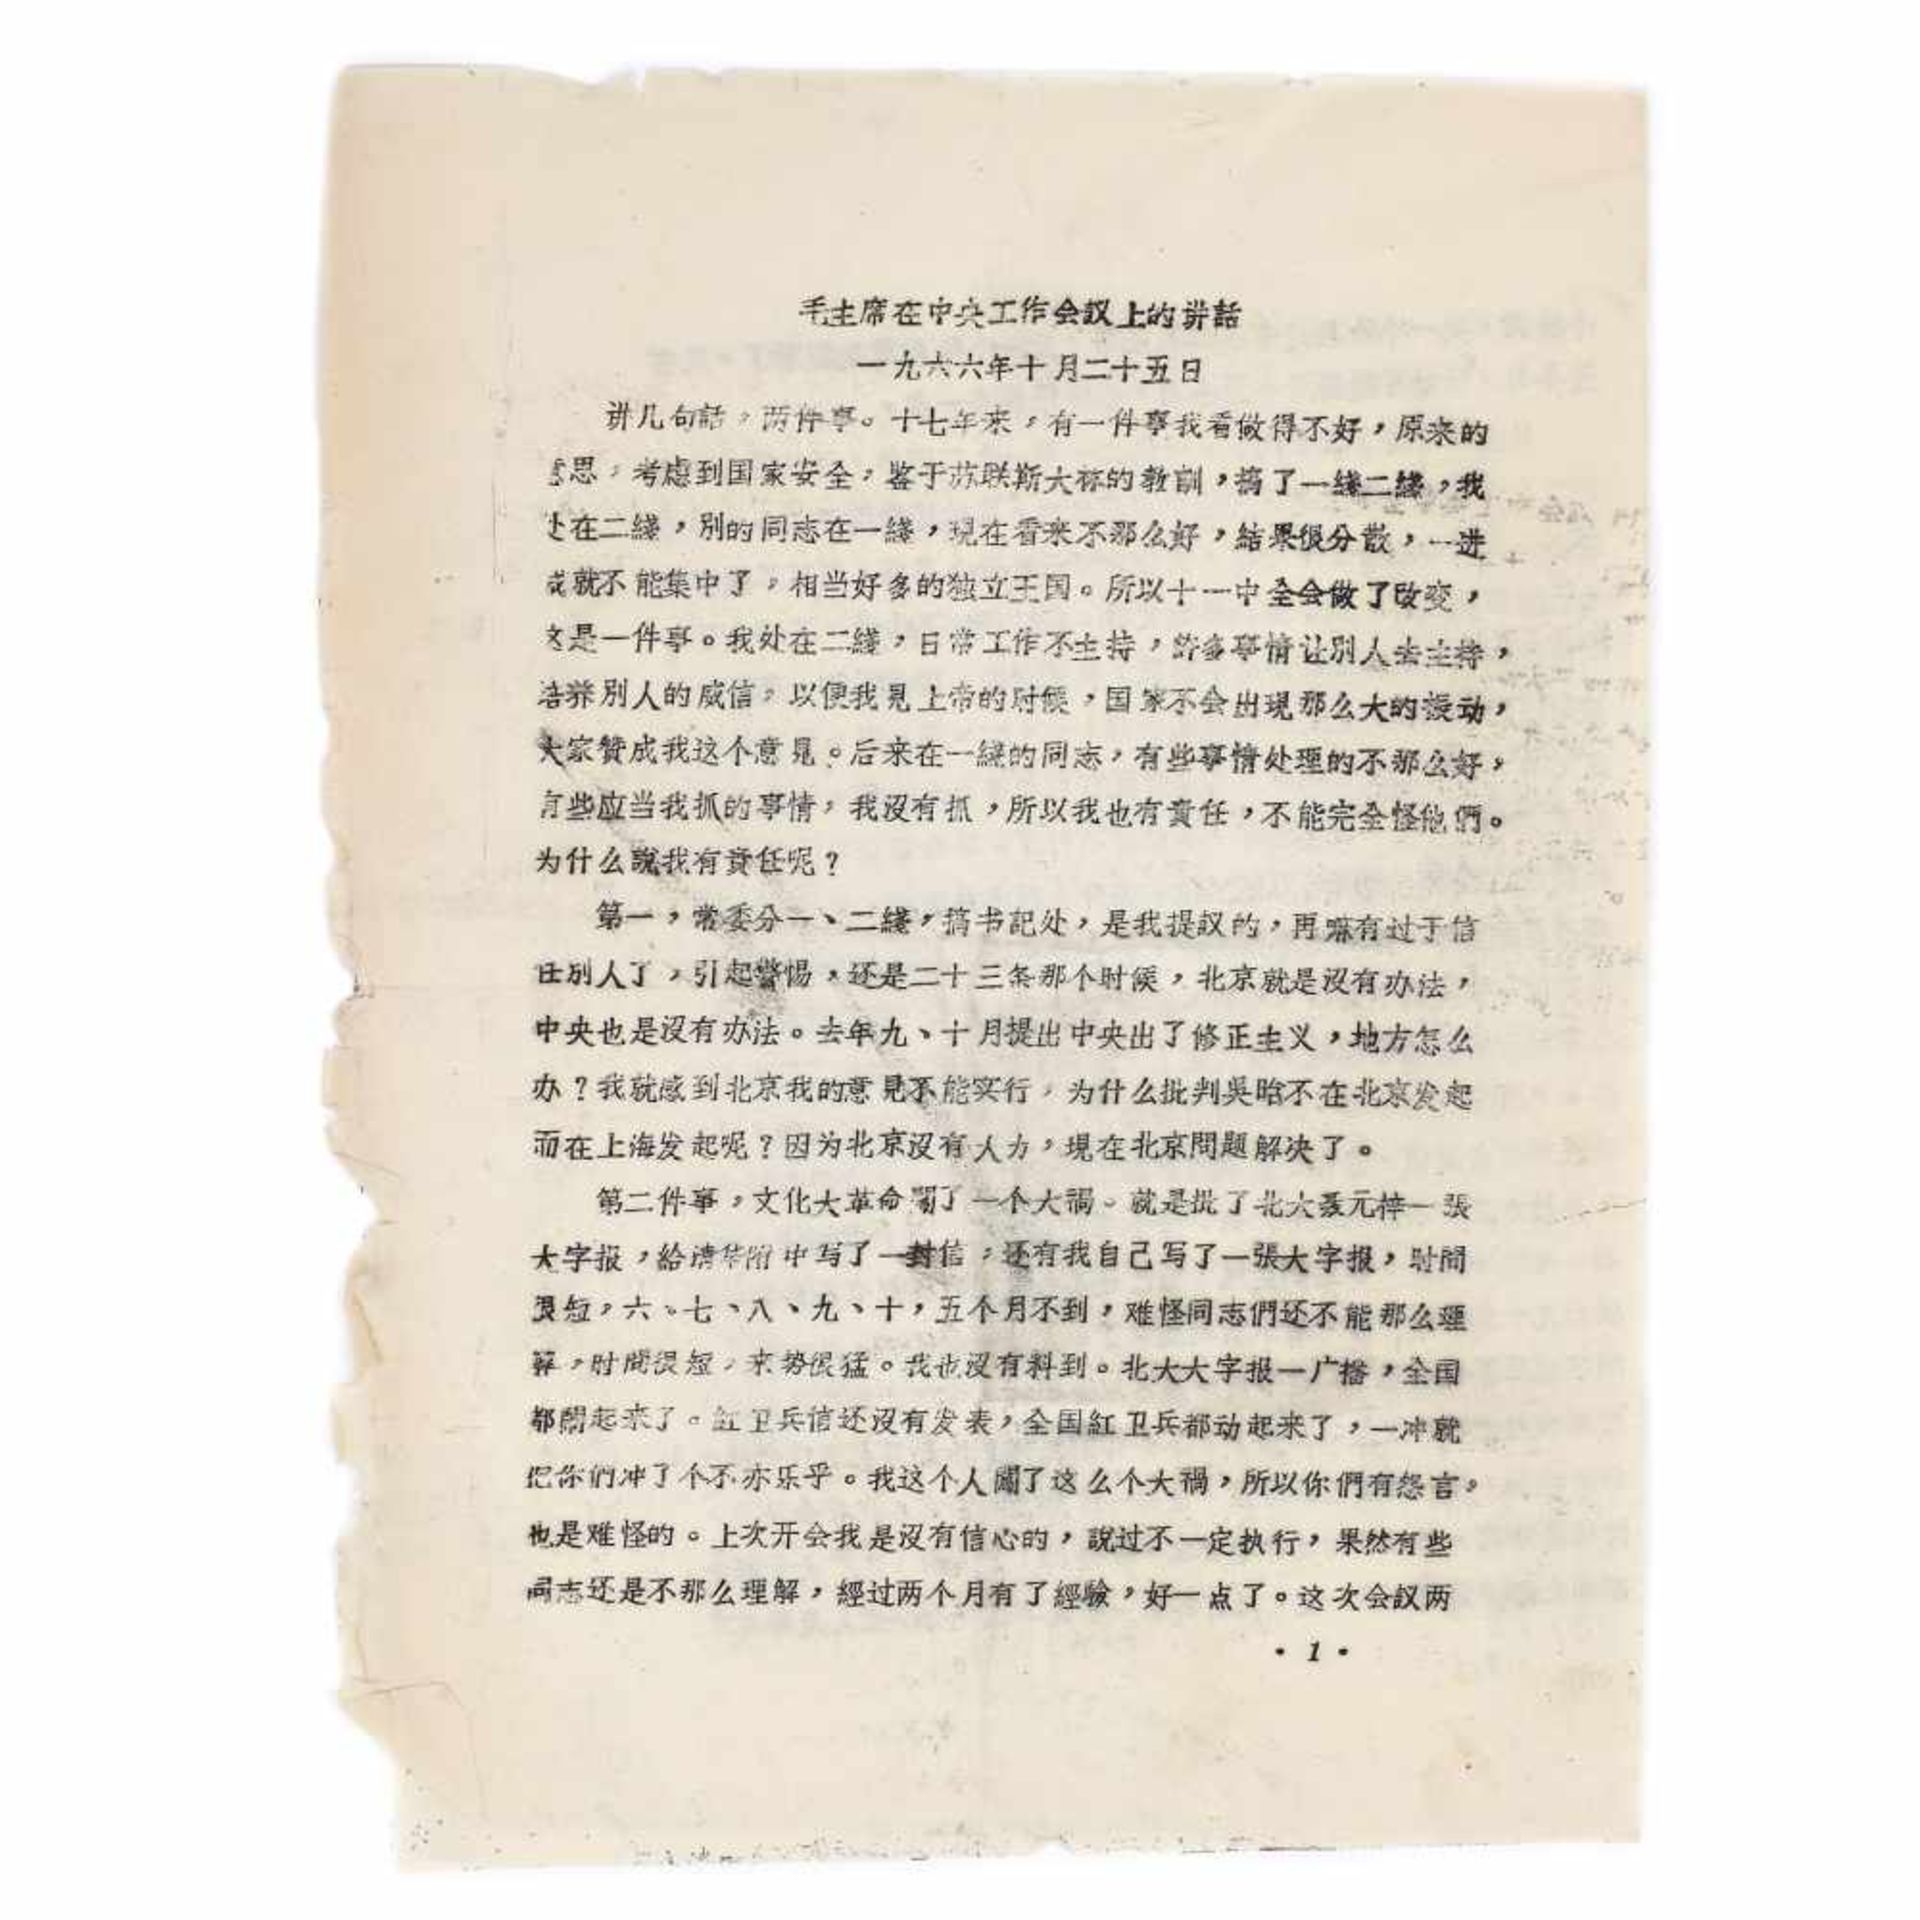 Transcript of a speech by Mao Zedong, leader of the Communist Party of China, during a party meeting - Bild 2 aus 4